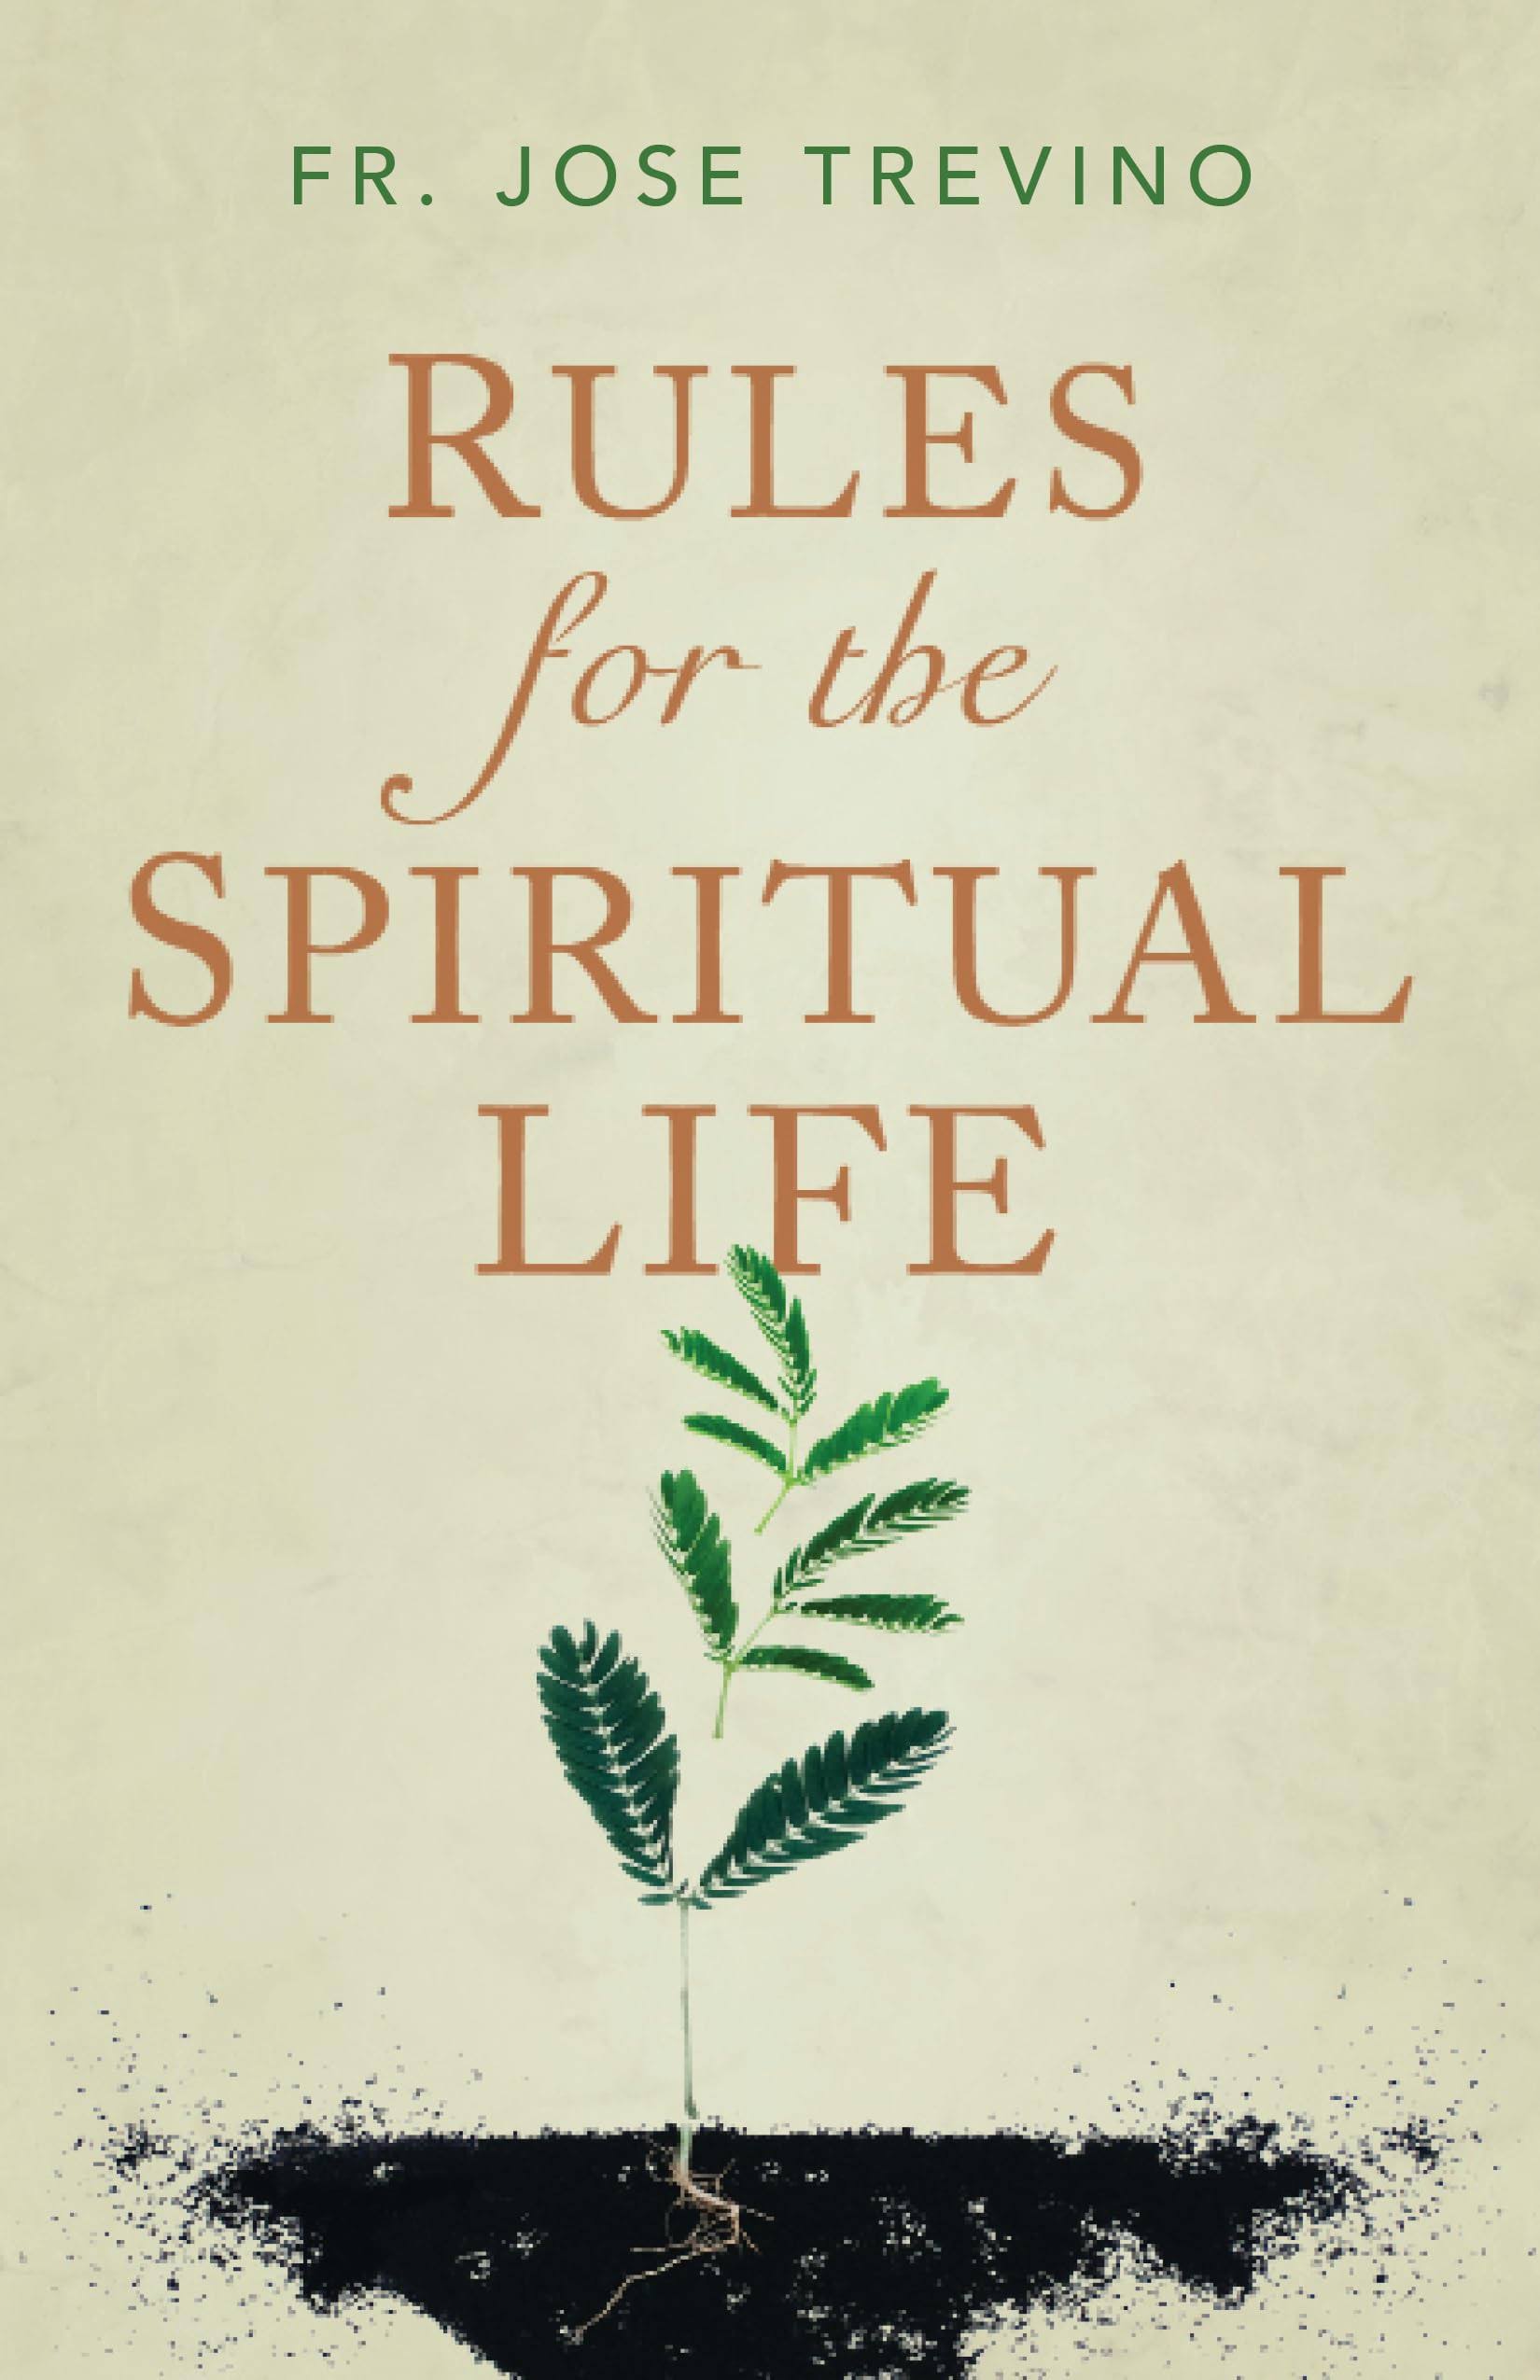 Rules for the Spiritual Life [Book]